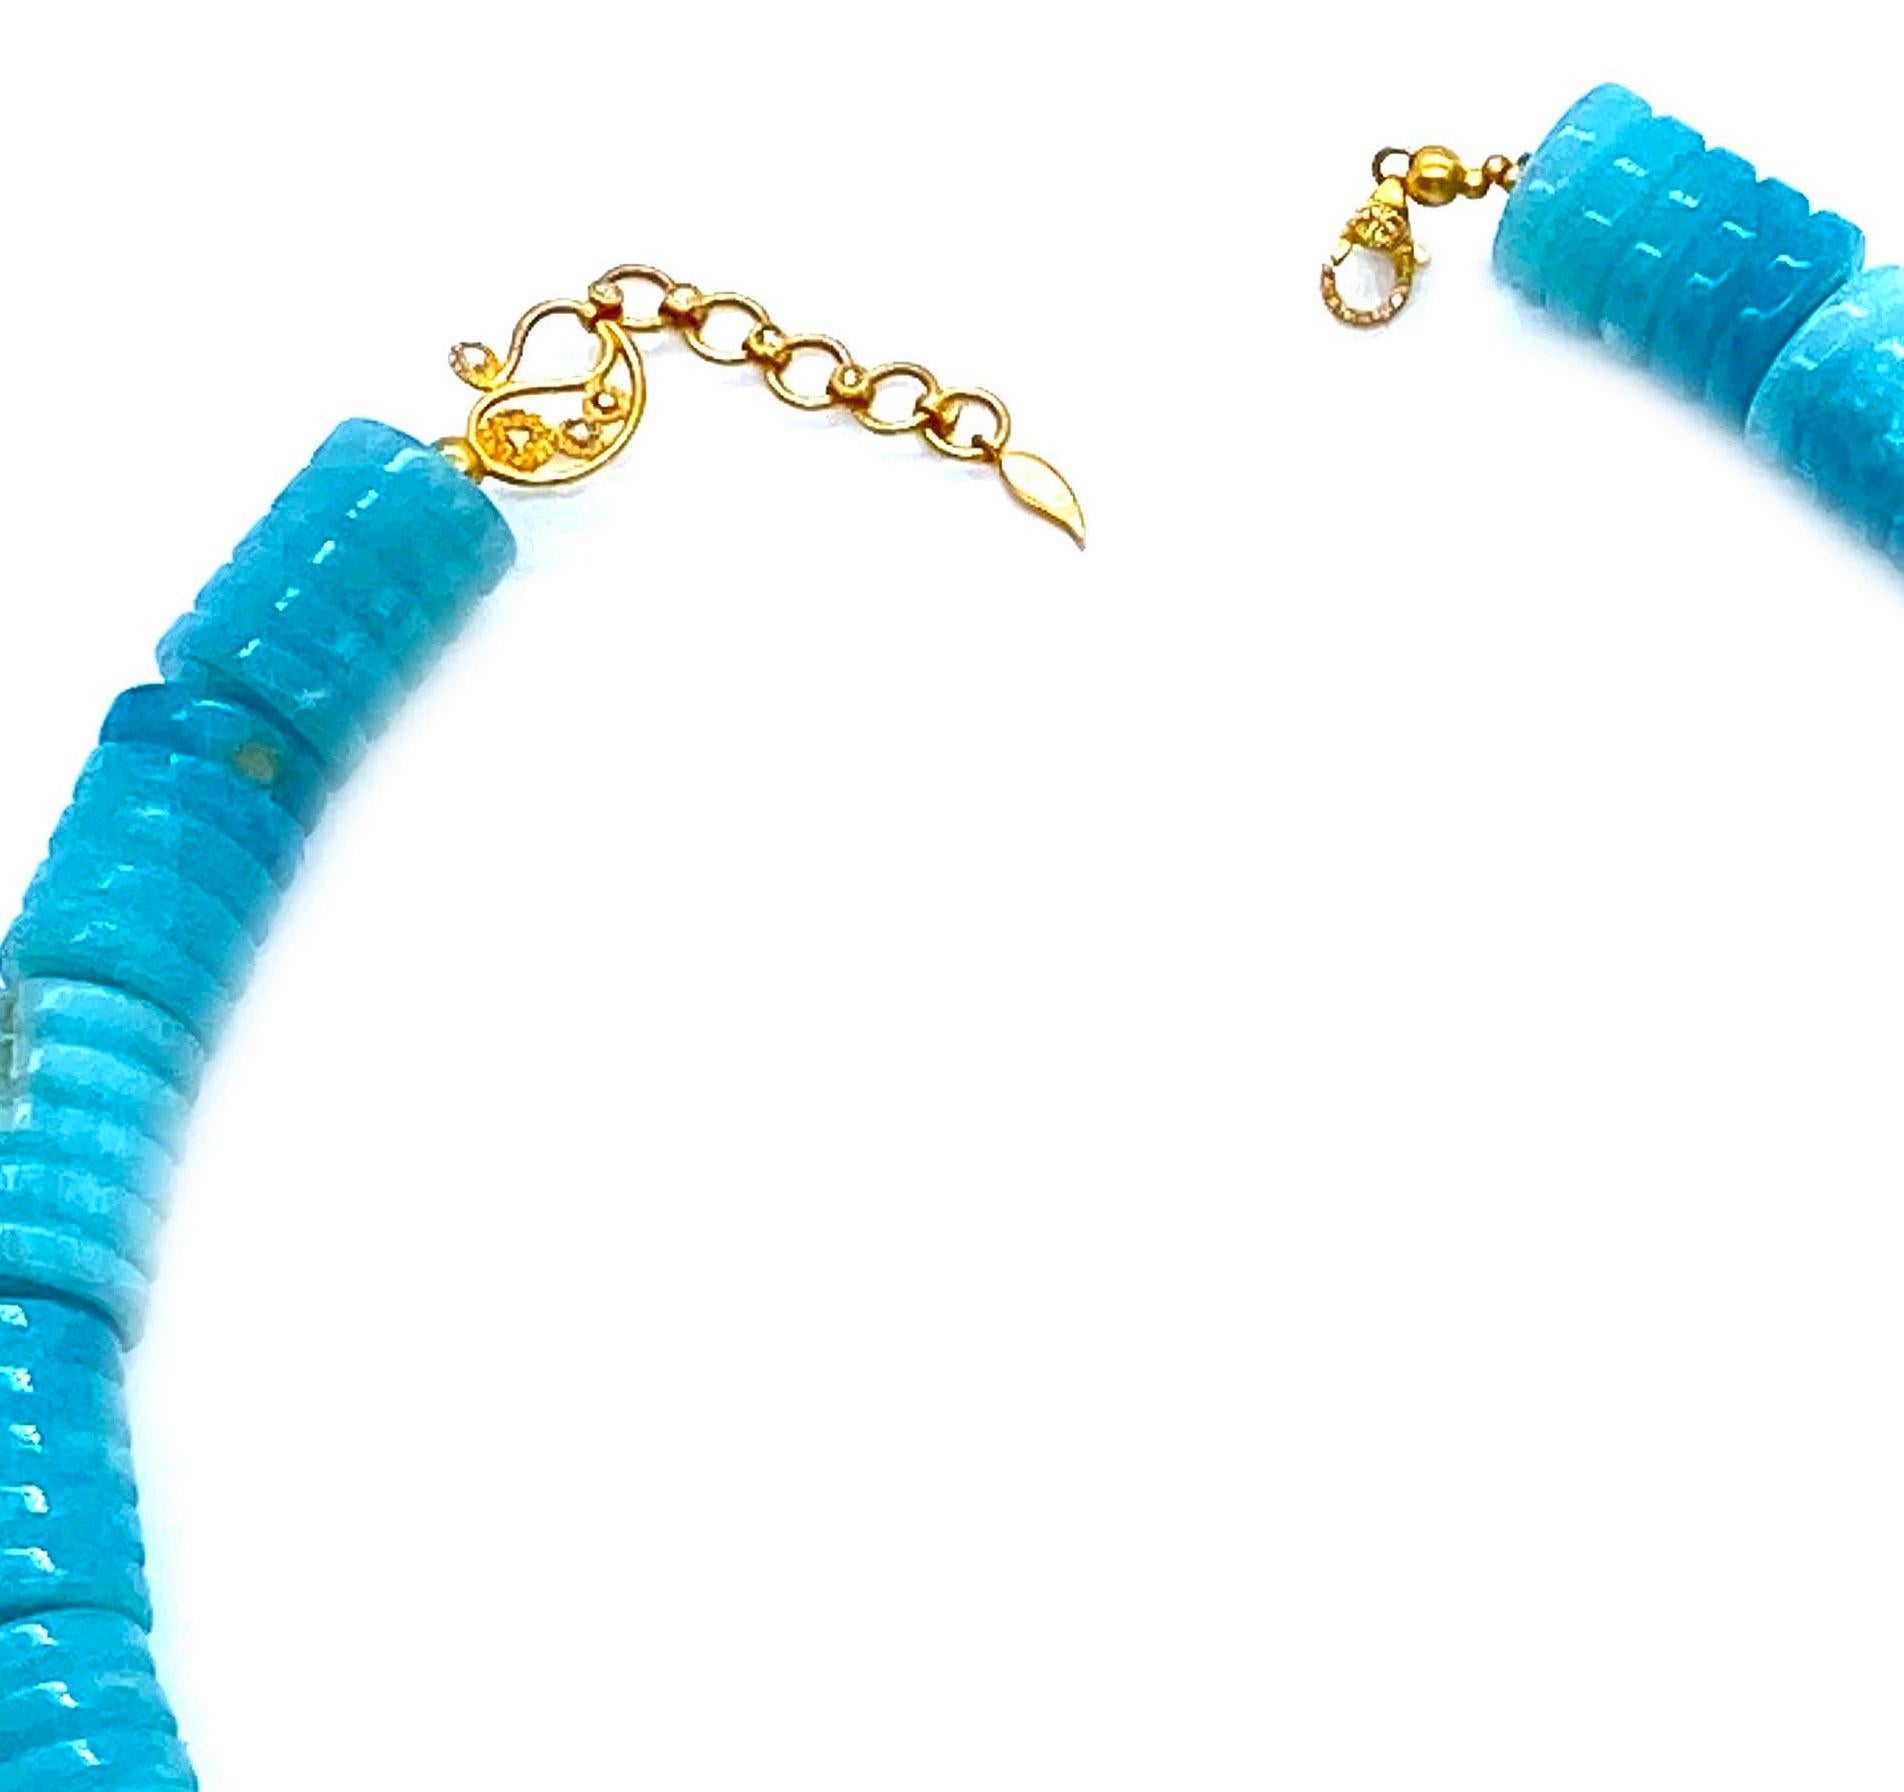 Contemporary Classic Handmade Aquamarine Beads Coomi 20 Karat Gold Necklace with Gold Beads For Sale